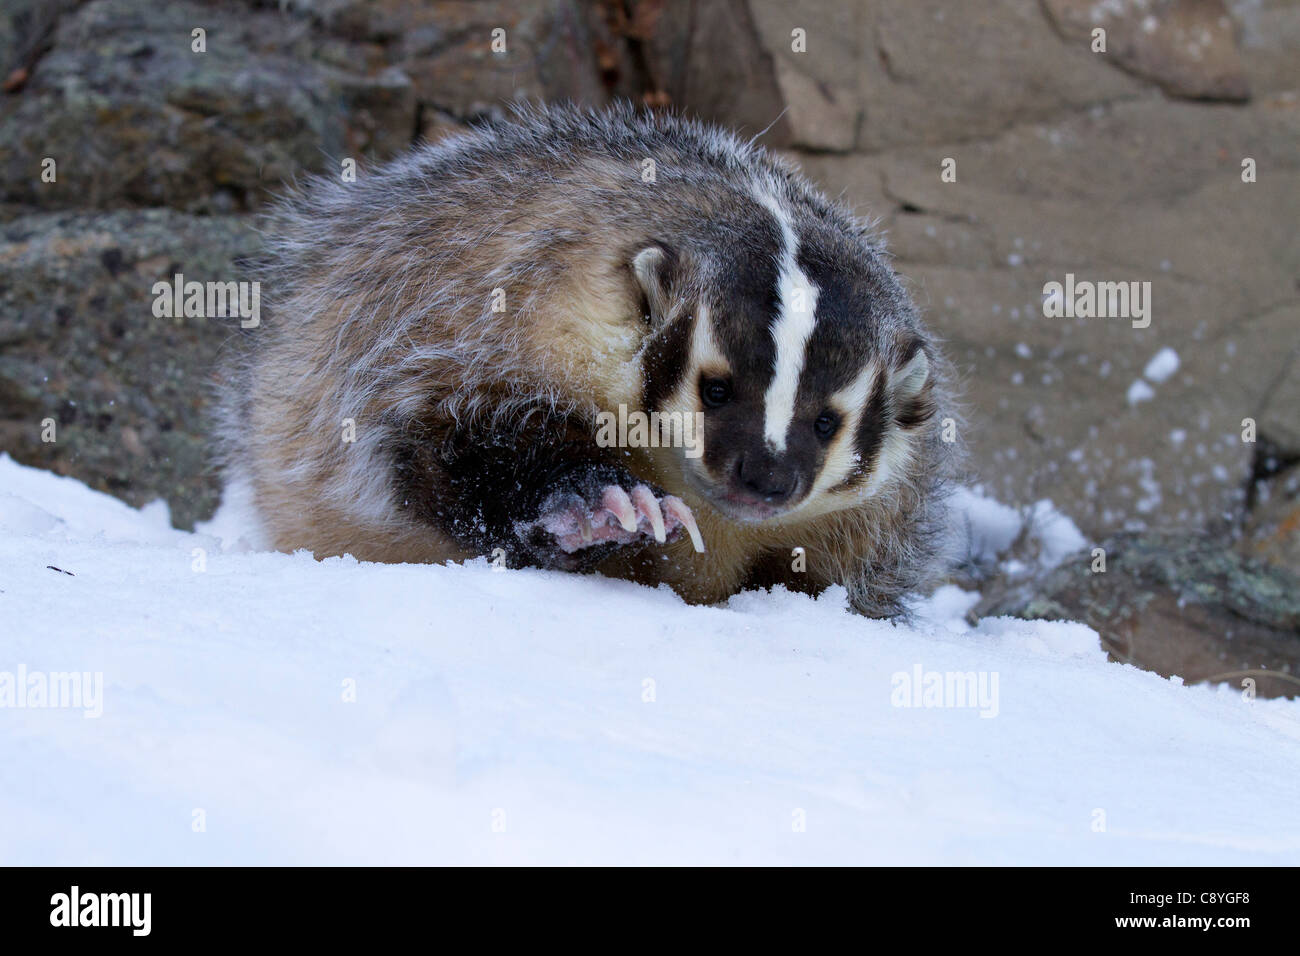 American Badger, Taxidea taxus digging in the snow Stock Photo